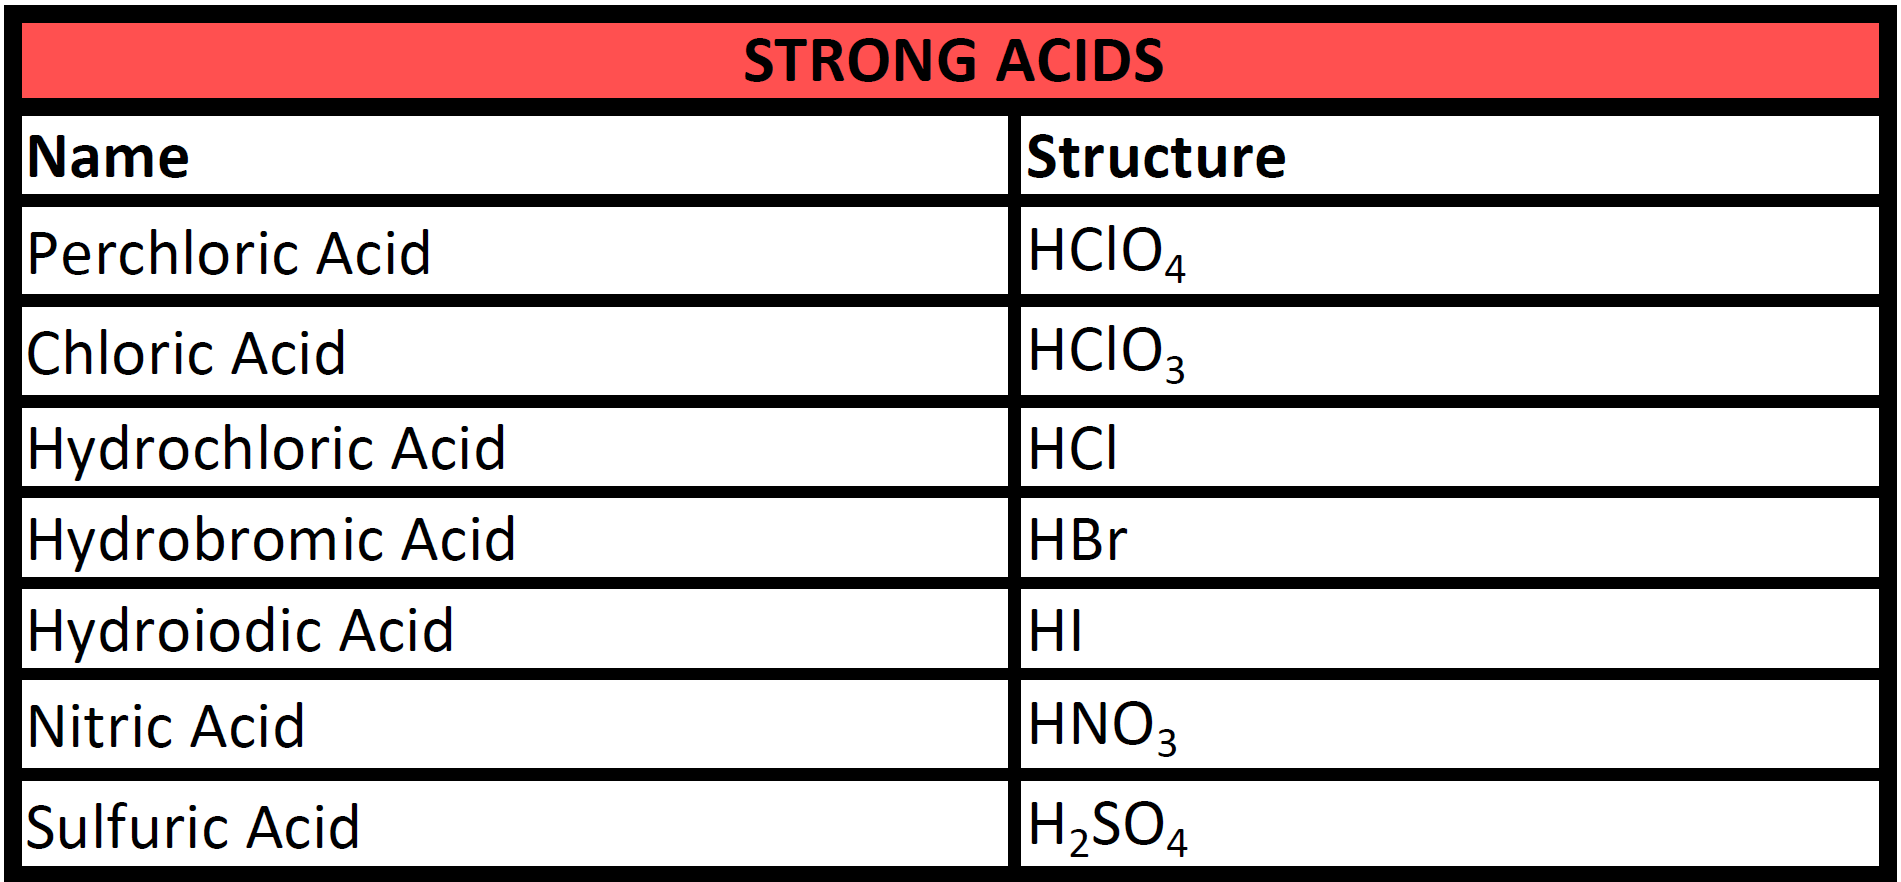 What is a Compound in Chemistry? - Types of Chemical Compound